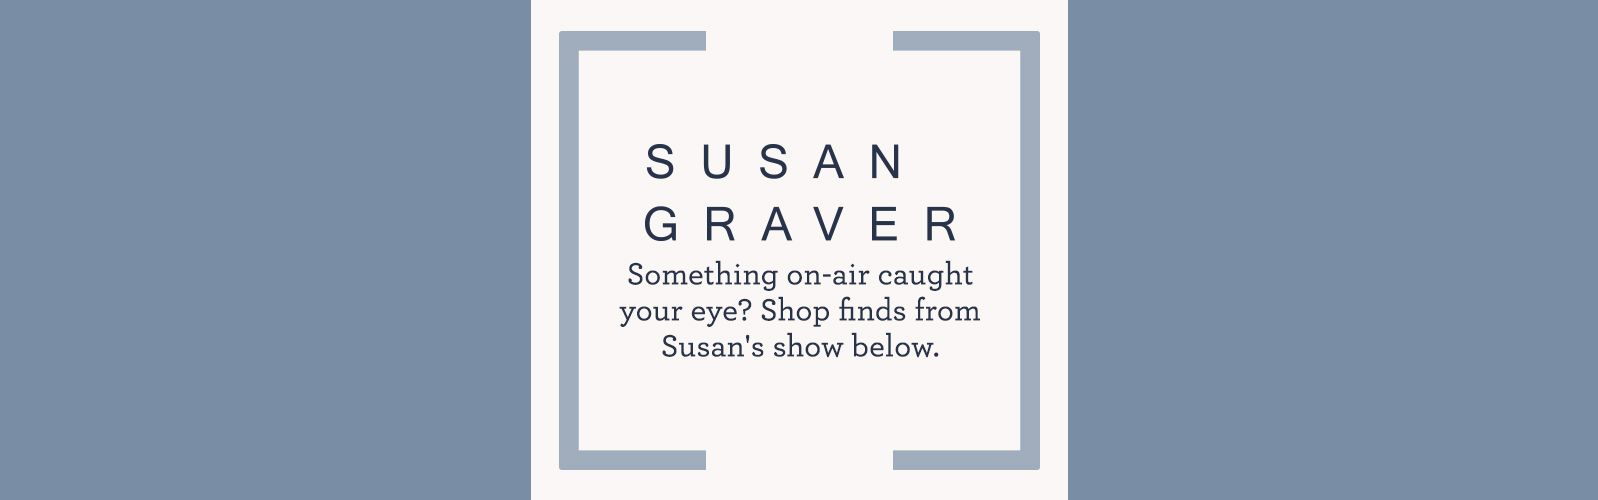 Susan Graver  Something on-air caught your eye? Shop finds from Susan's show below.